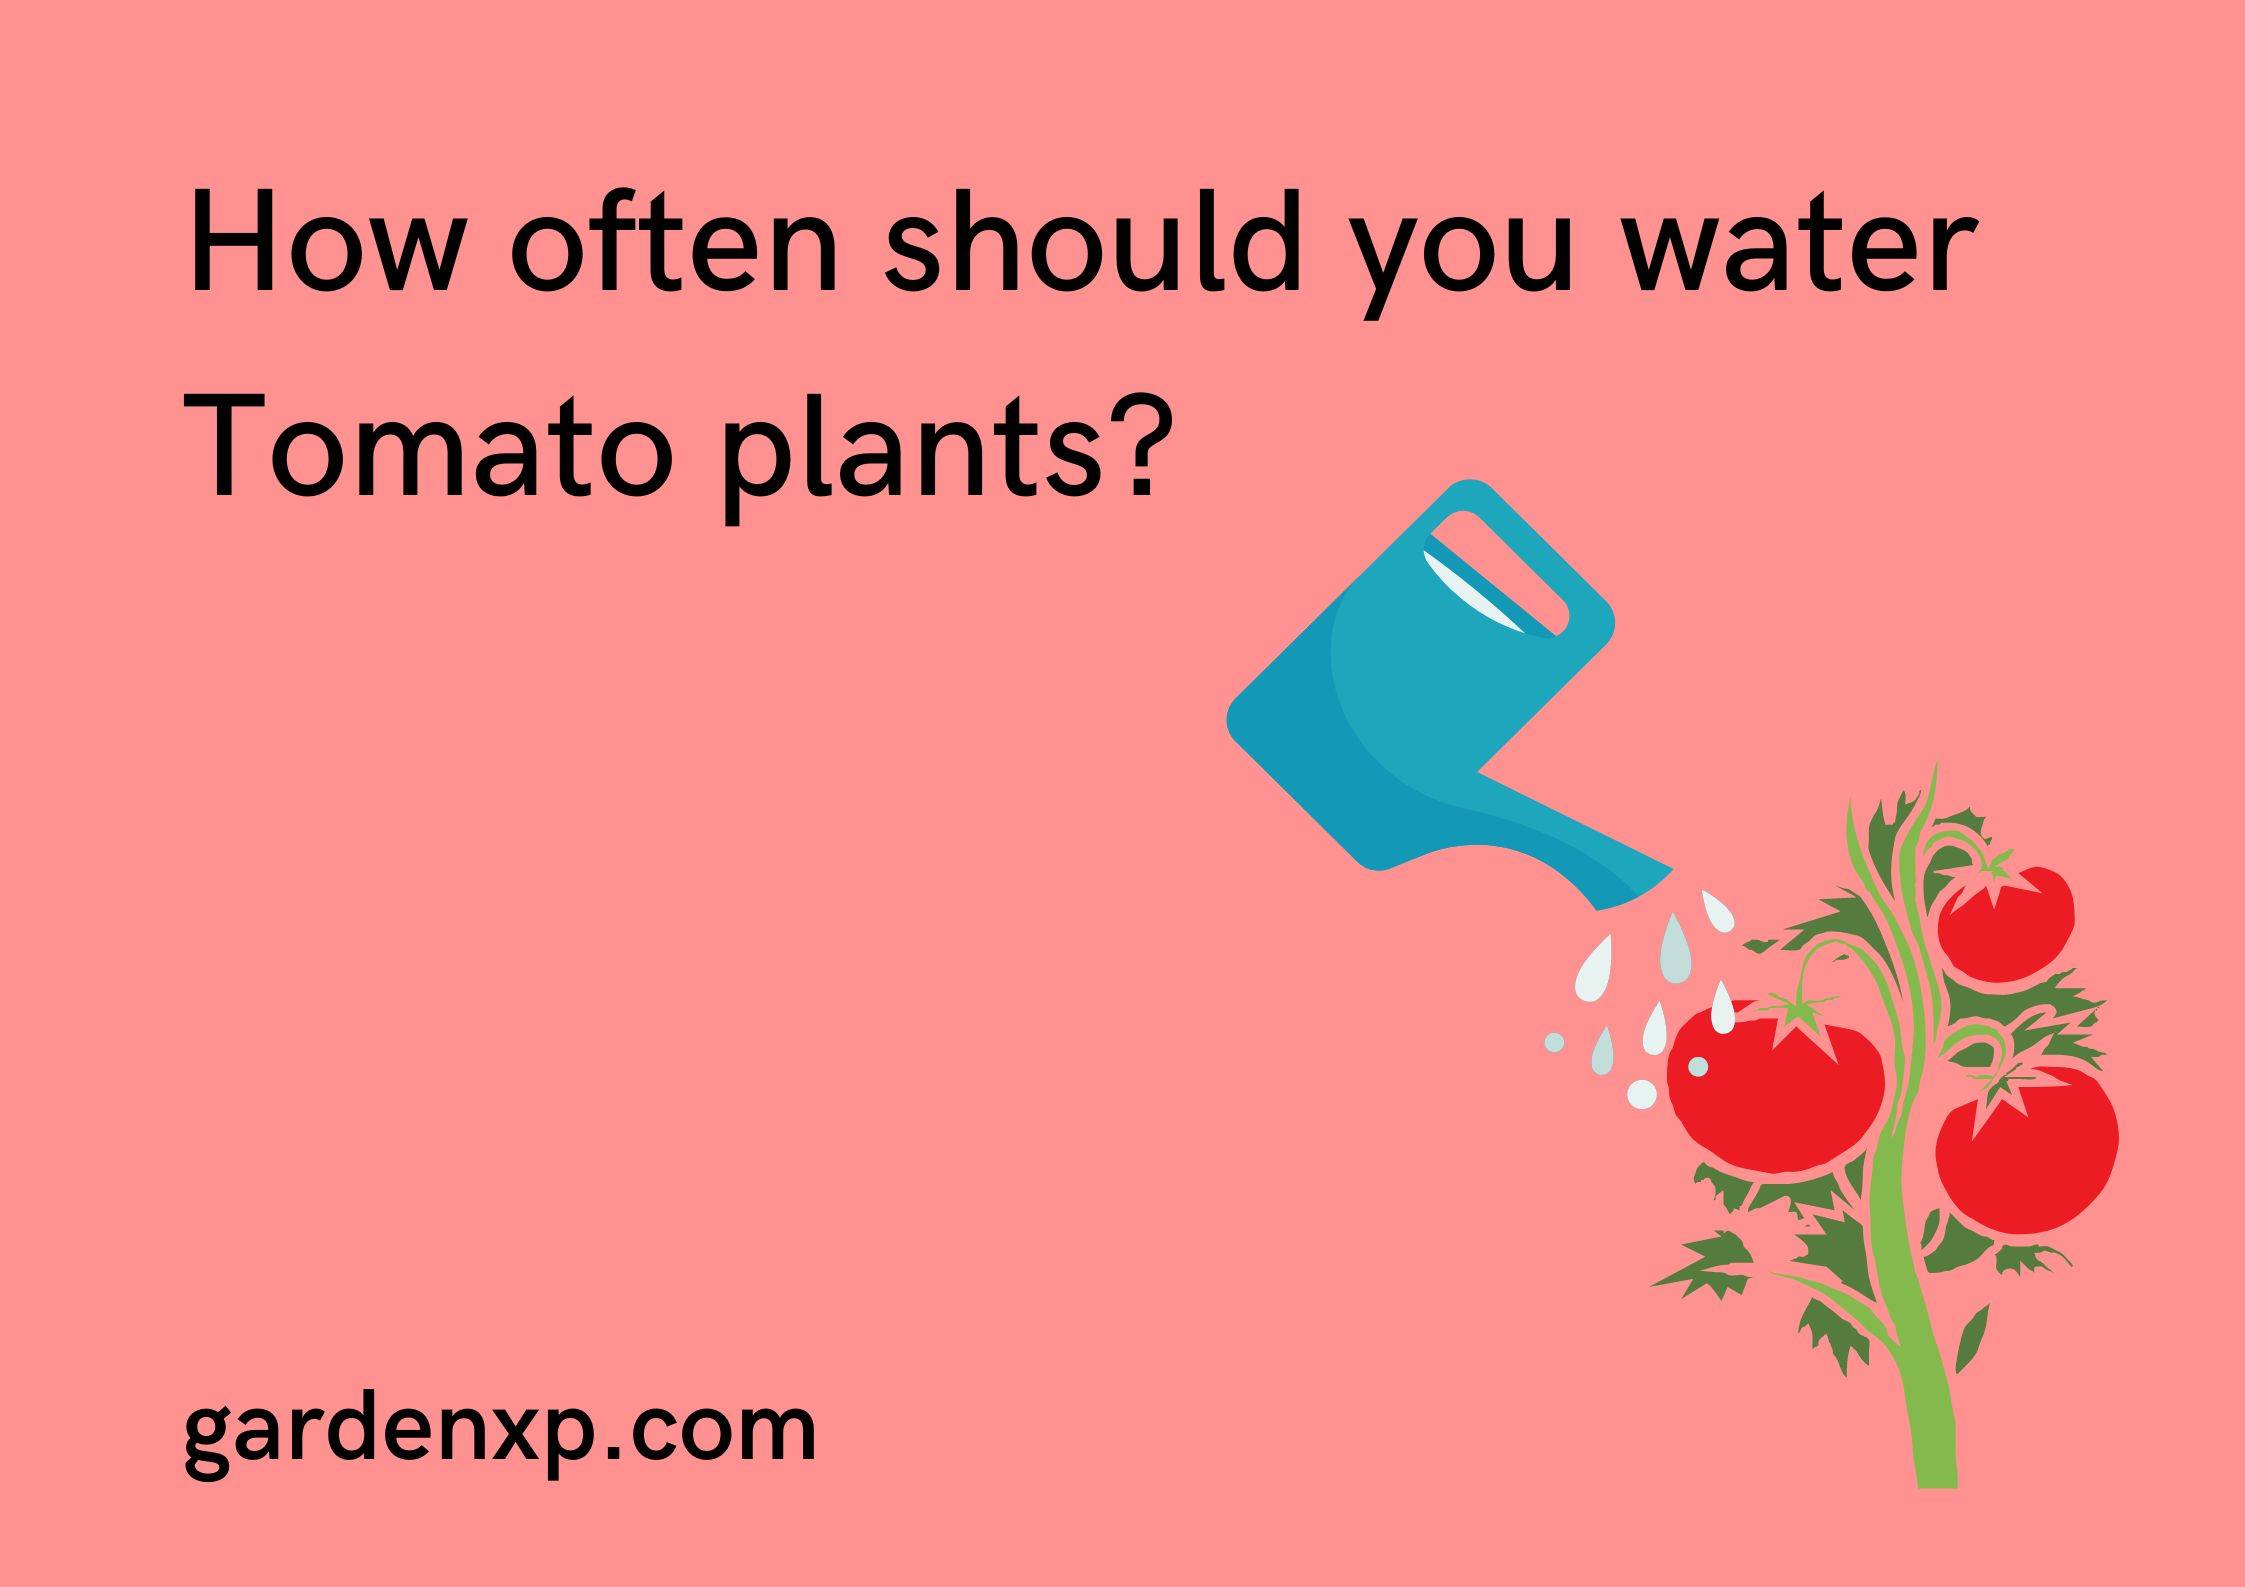 How often should you water Tomato plants?